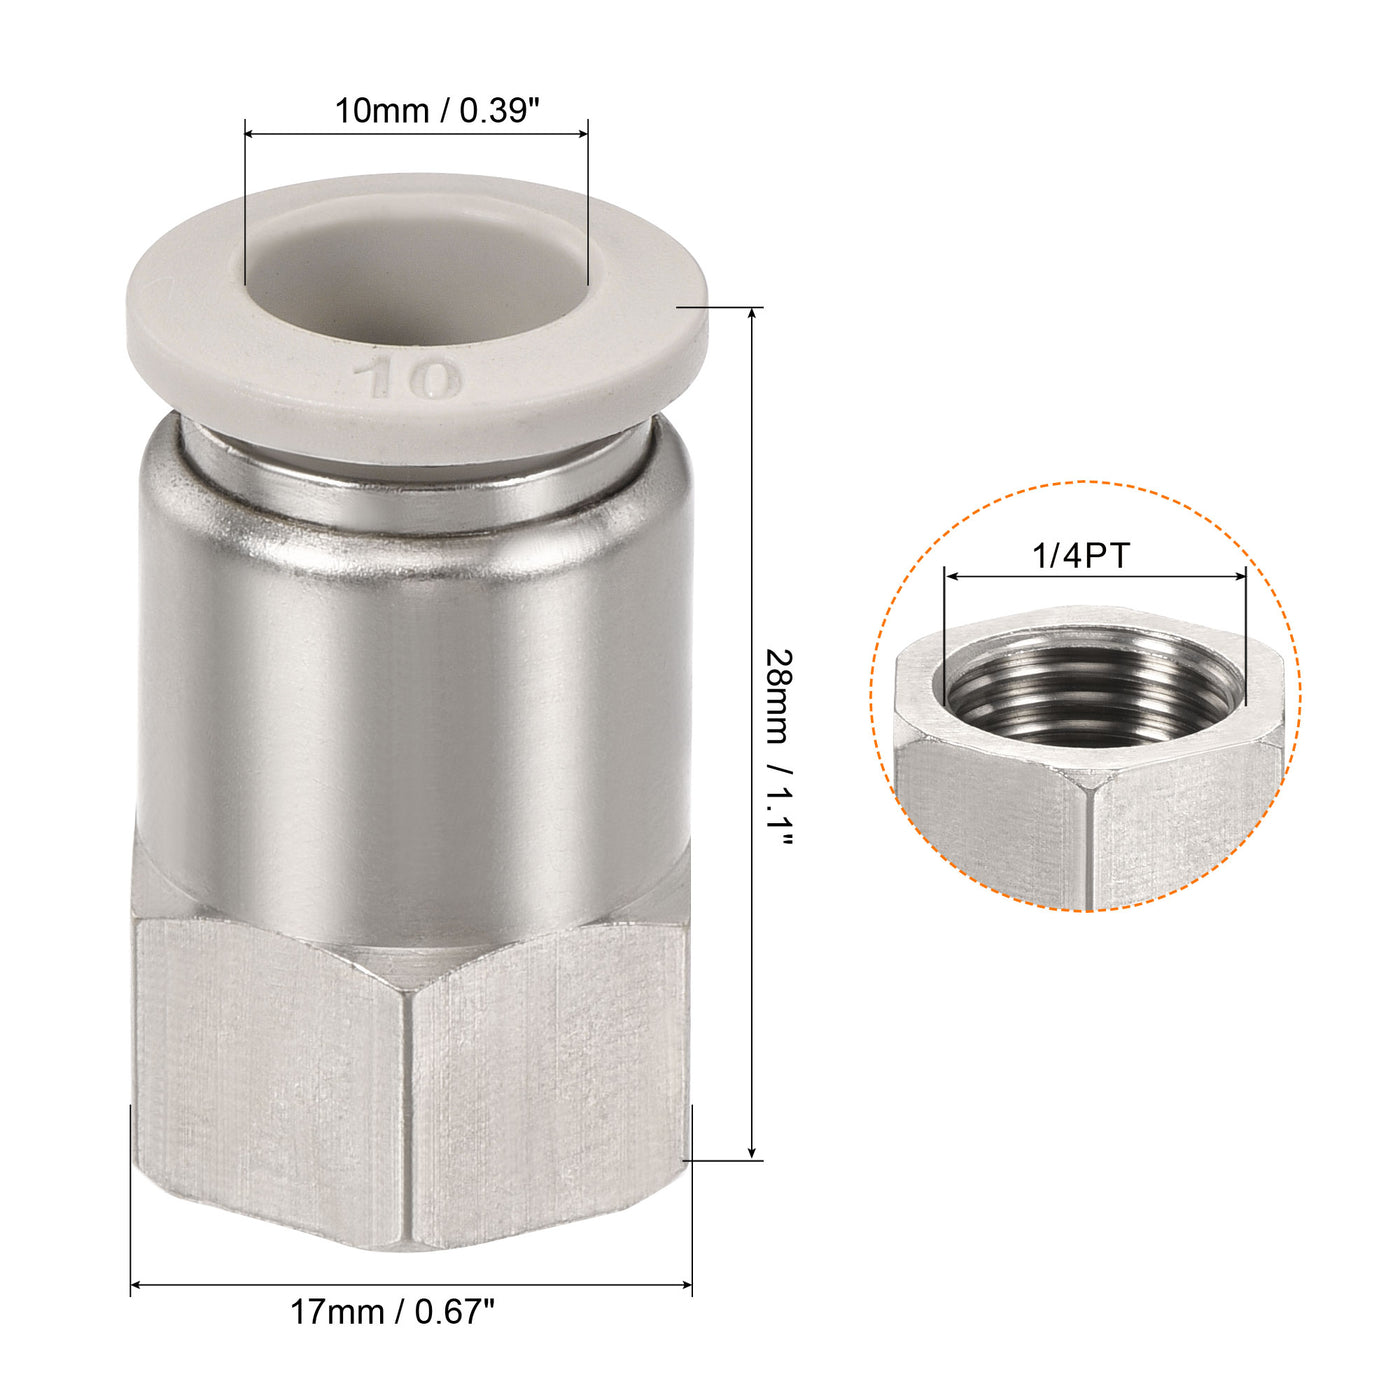 Harfington Push to Connect Fittings 1/4PT Female Thread Fit 10mm Tube OD Nickel-plated Copper Straight Union Fitting, Pack of 4